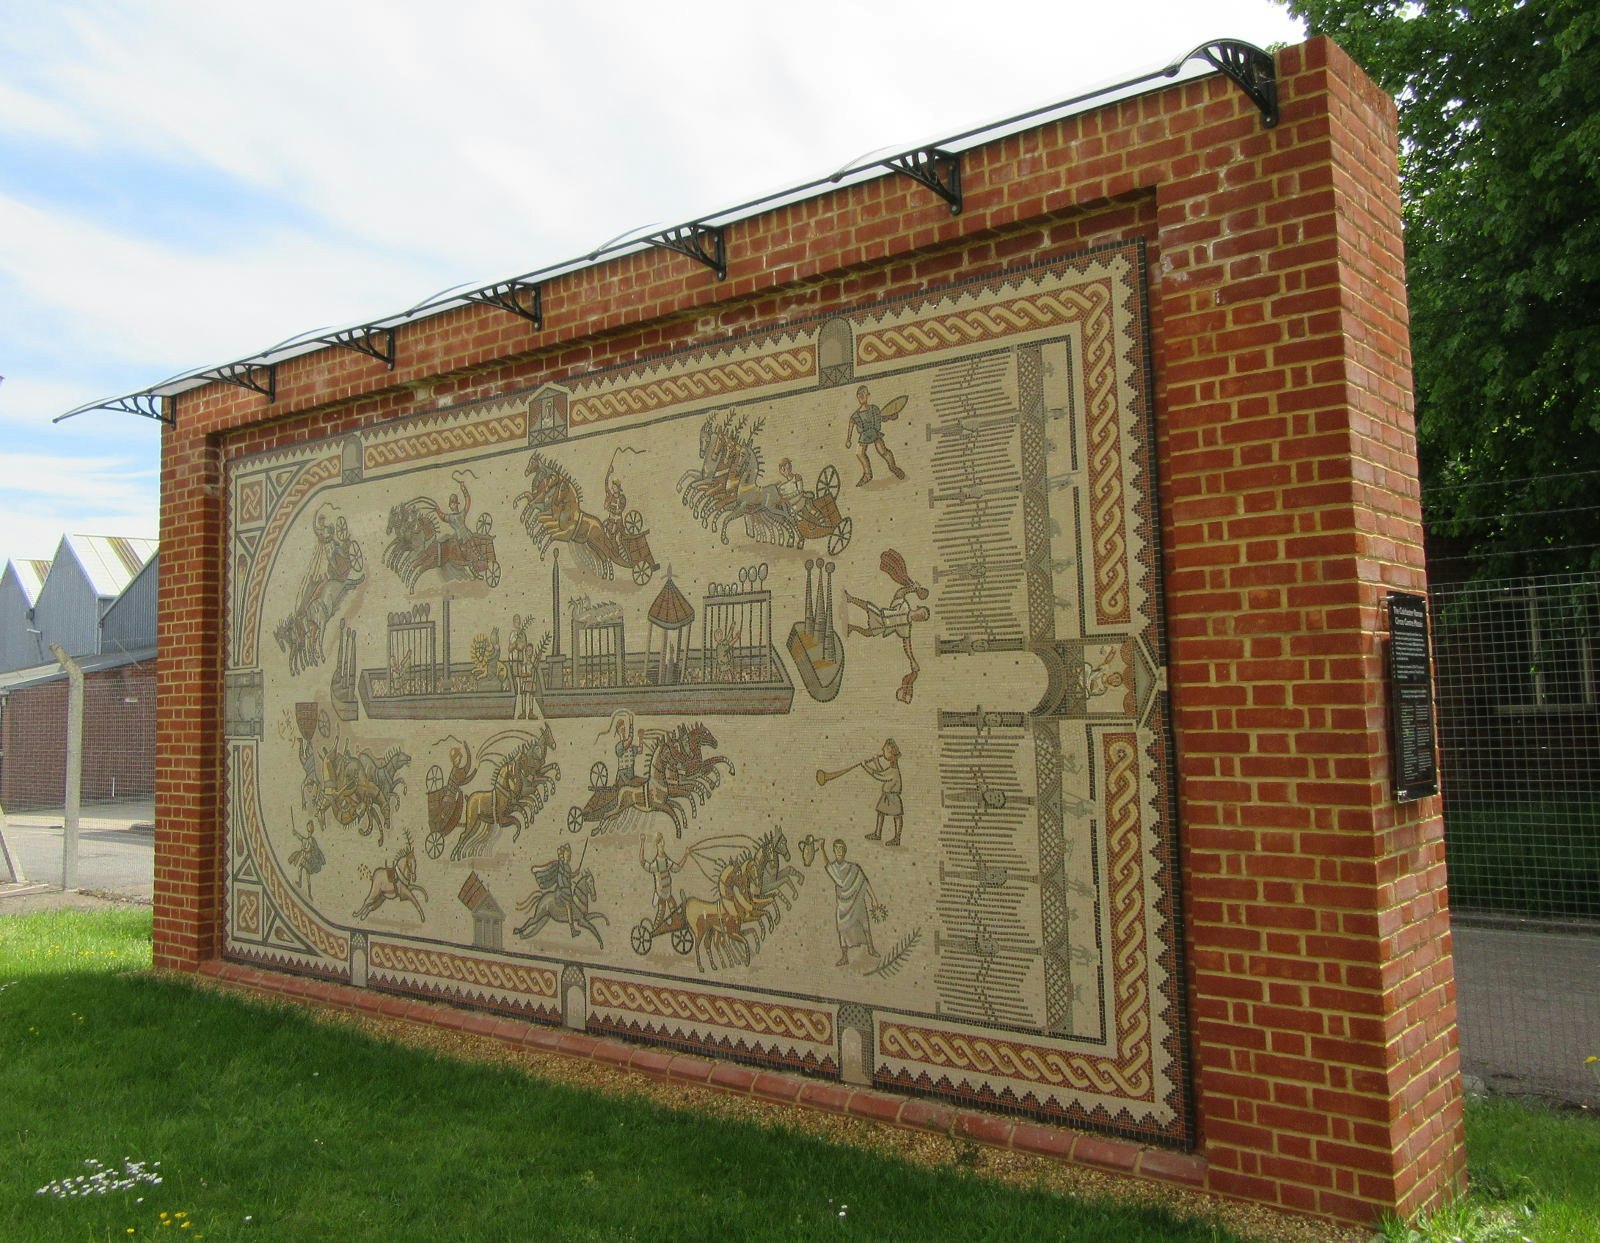 A large mosaic detailing chariot racing on a red brick wall.